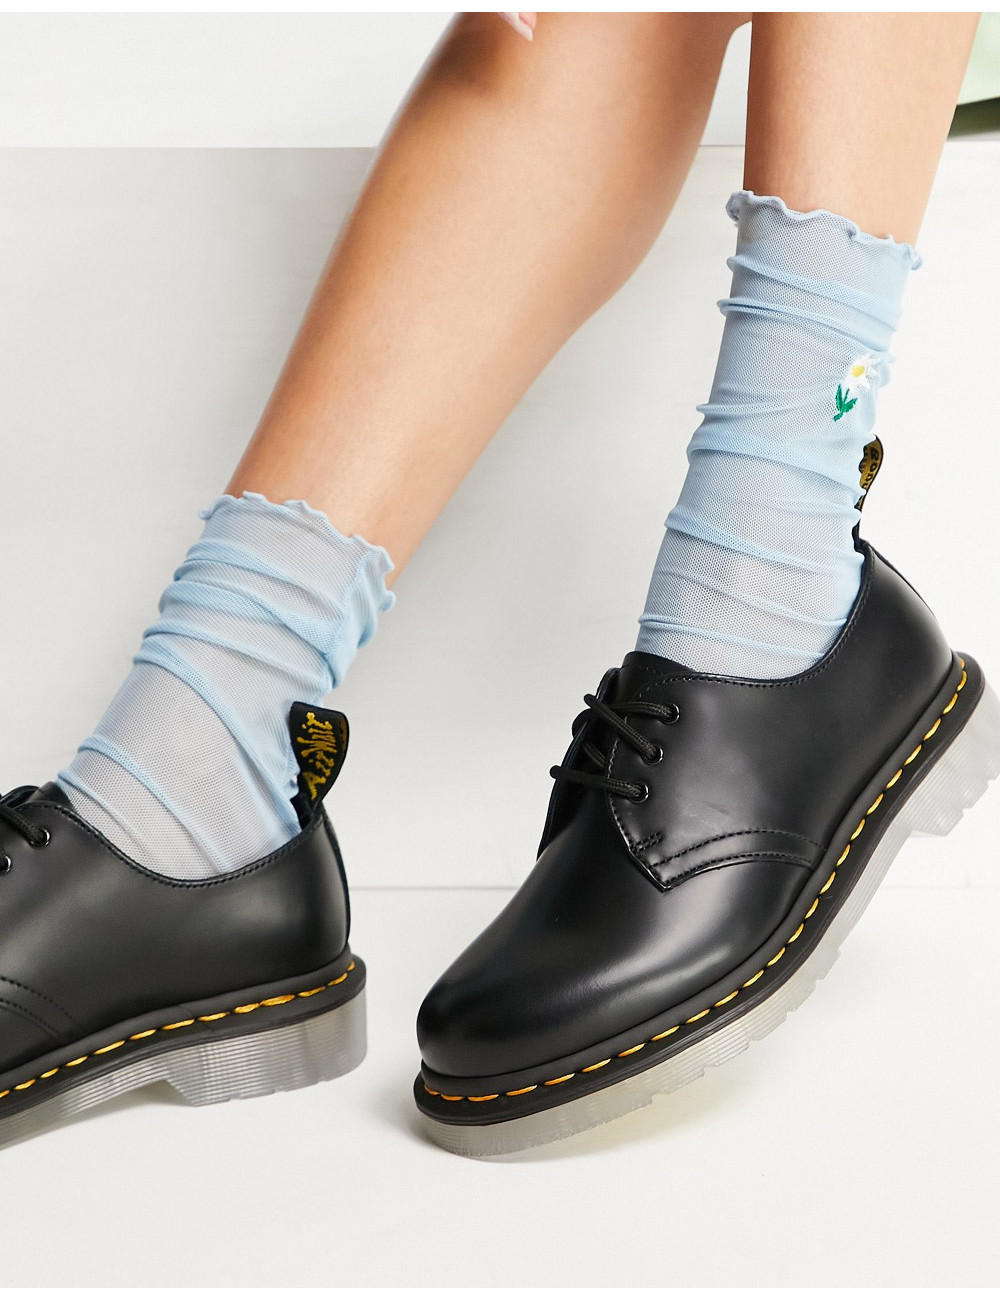 Dr Martens 1461 Iced shoes...